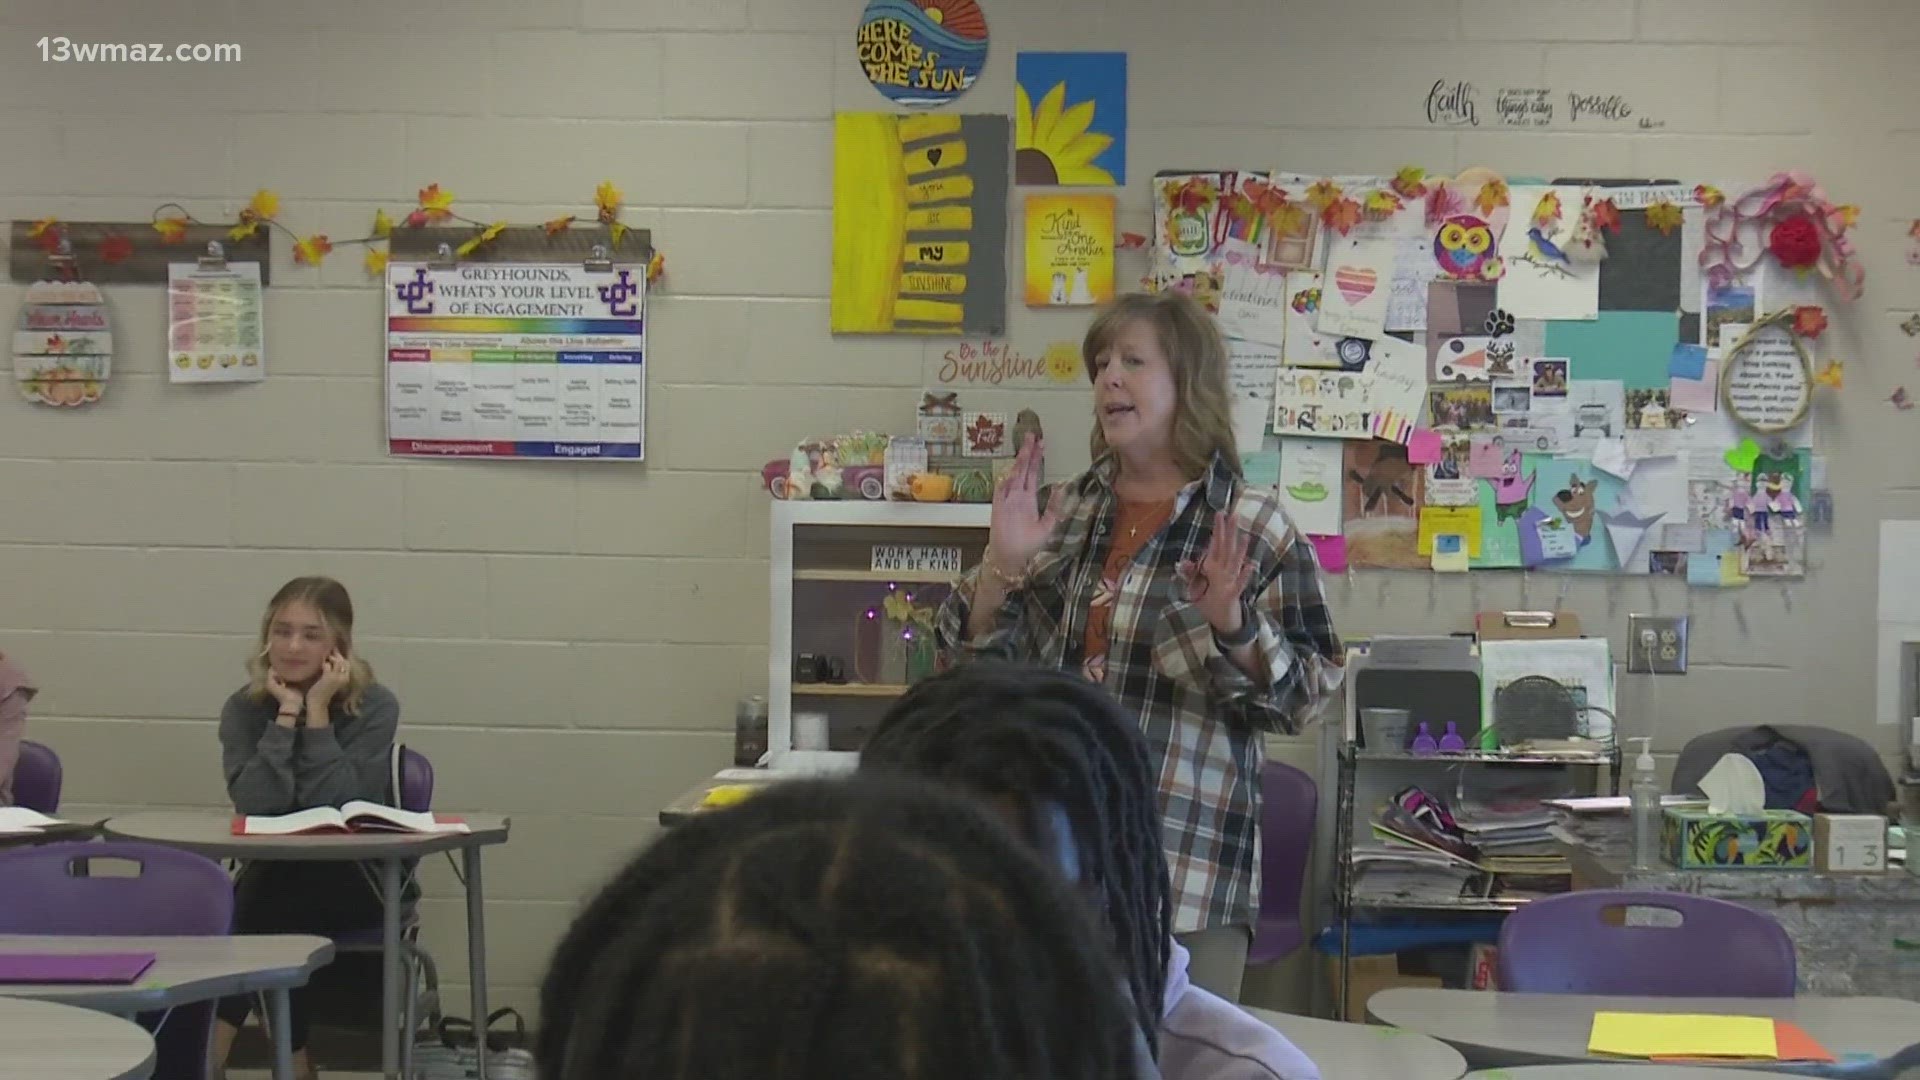 Mrs. Kimberly Hanner has been teaching for 30 years and she says Jones County High School's not getting rid of her yet.